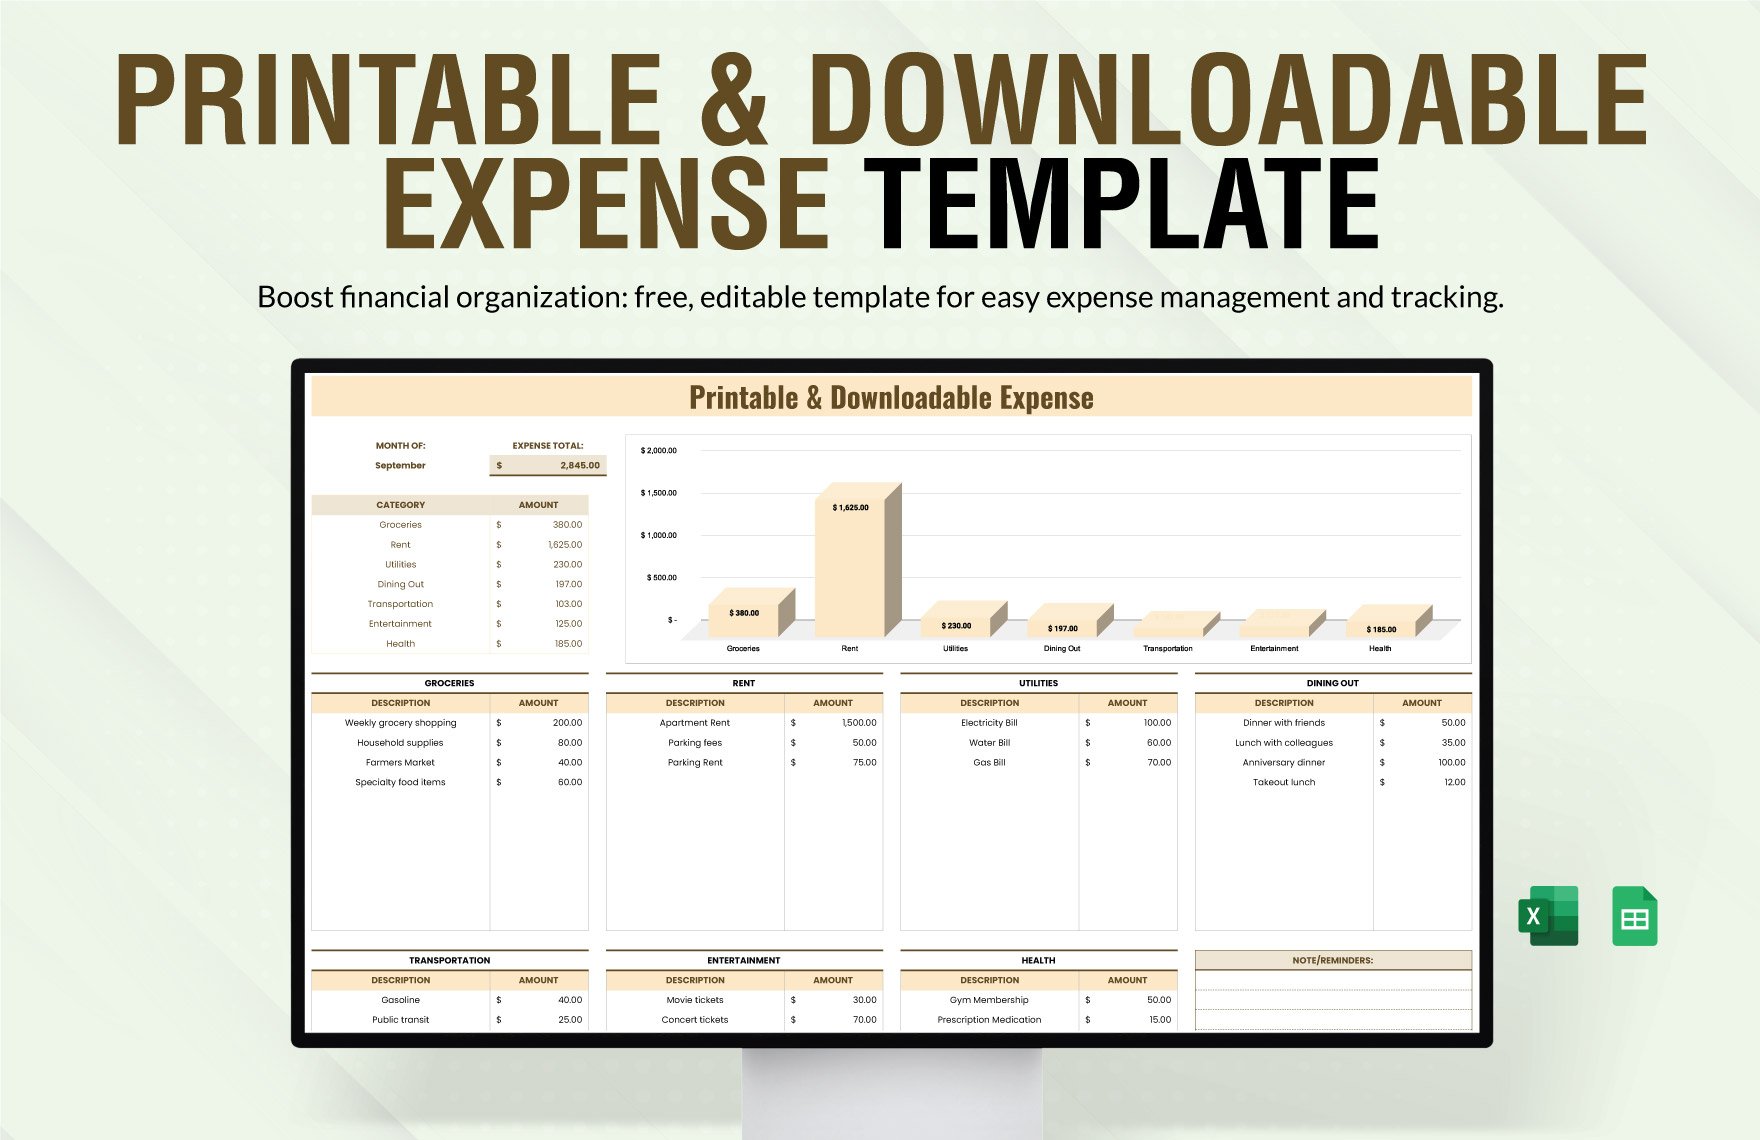 Free Printable & Downloadable Expense Template